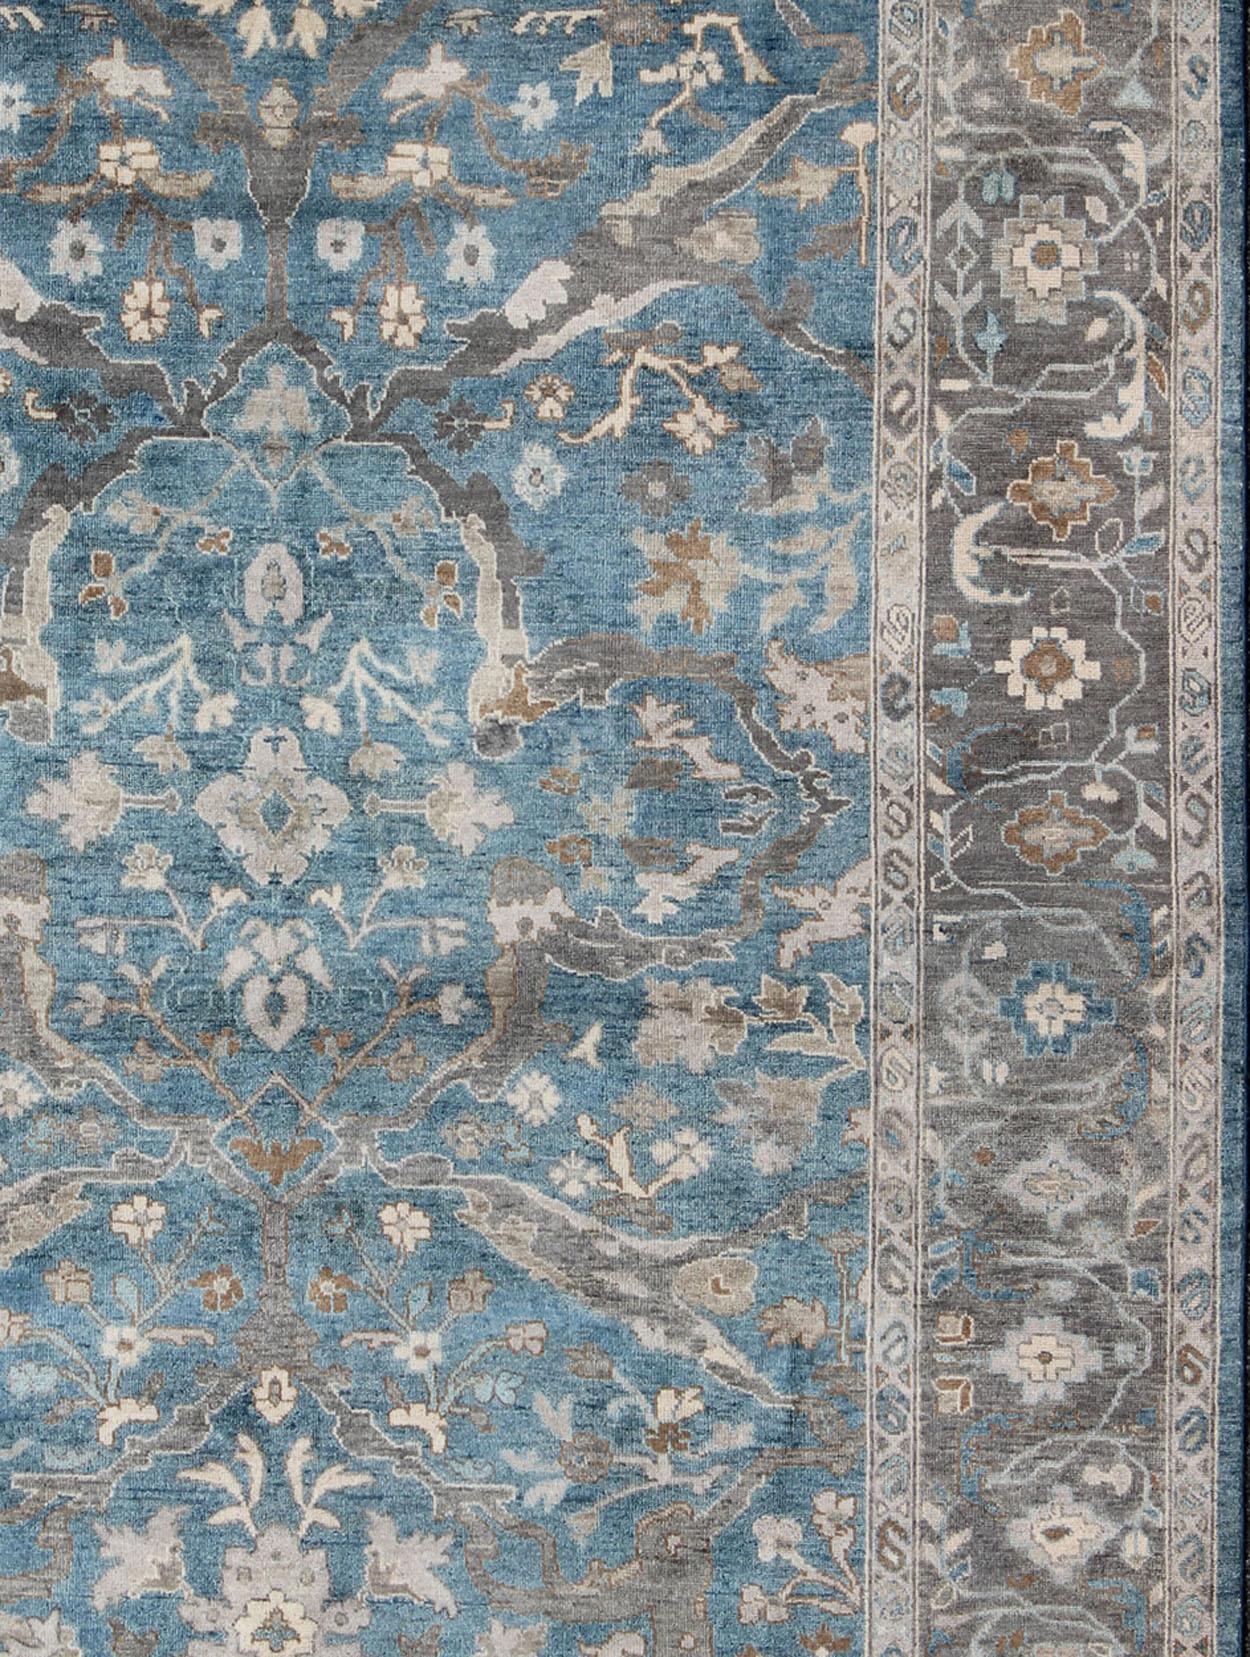 Modern Sultanabad, Keivan woven Arts, rug/OB-9458373, hand-knotted with all-over design. Circa/ 2010

Measures: 9'0 x 12'0.